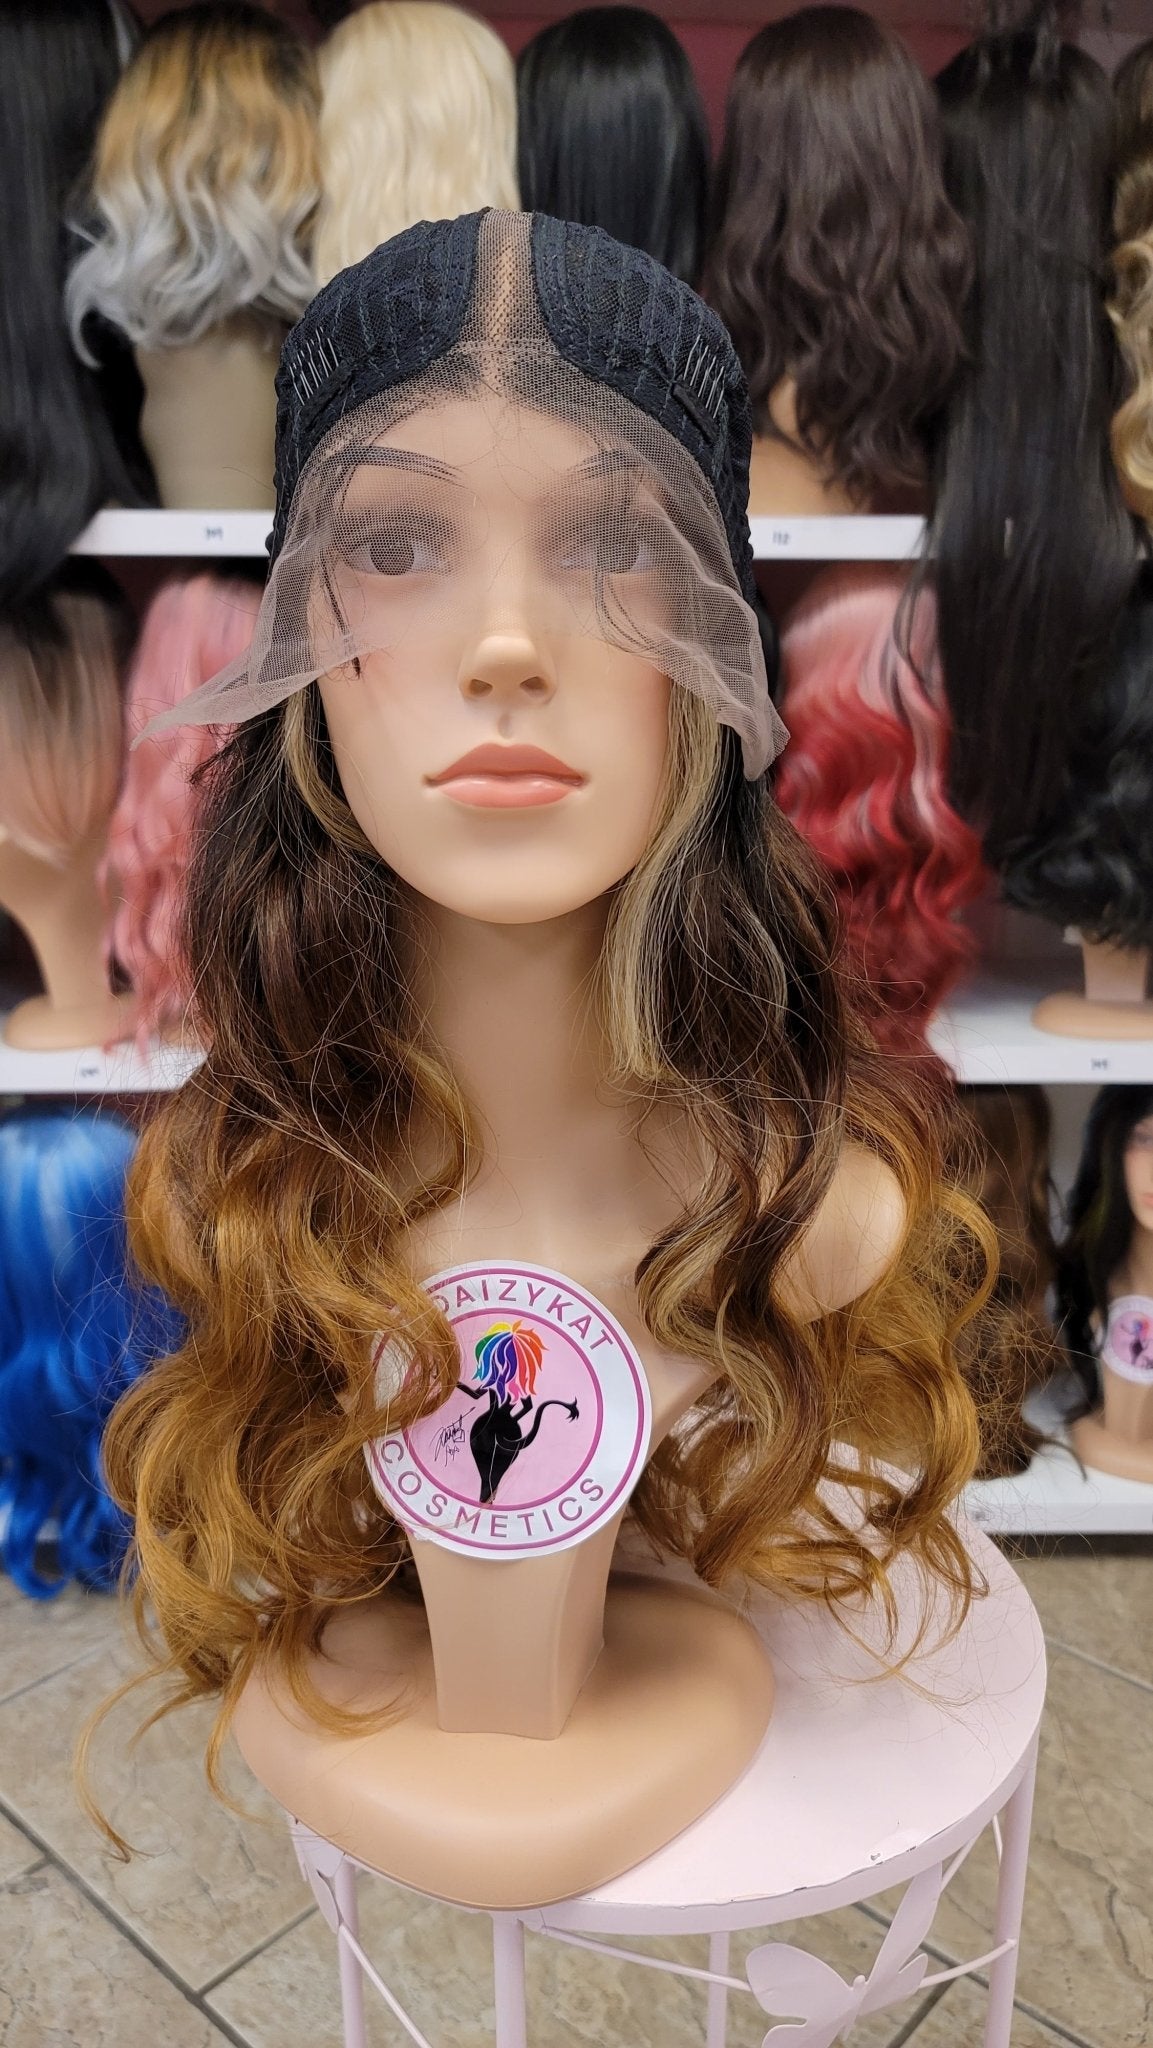 35 Katie - Middle Part Lace Front Wig - 27/4 - DaizyKat Cosmetics 35 Katie - Middle Part Lace Front Wig - 27/4 DaizyKat Cosmetics Wigs